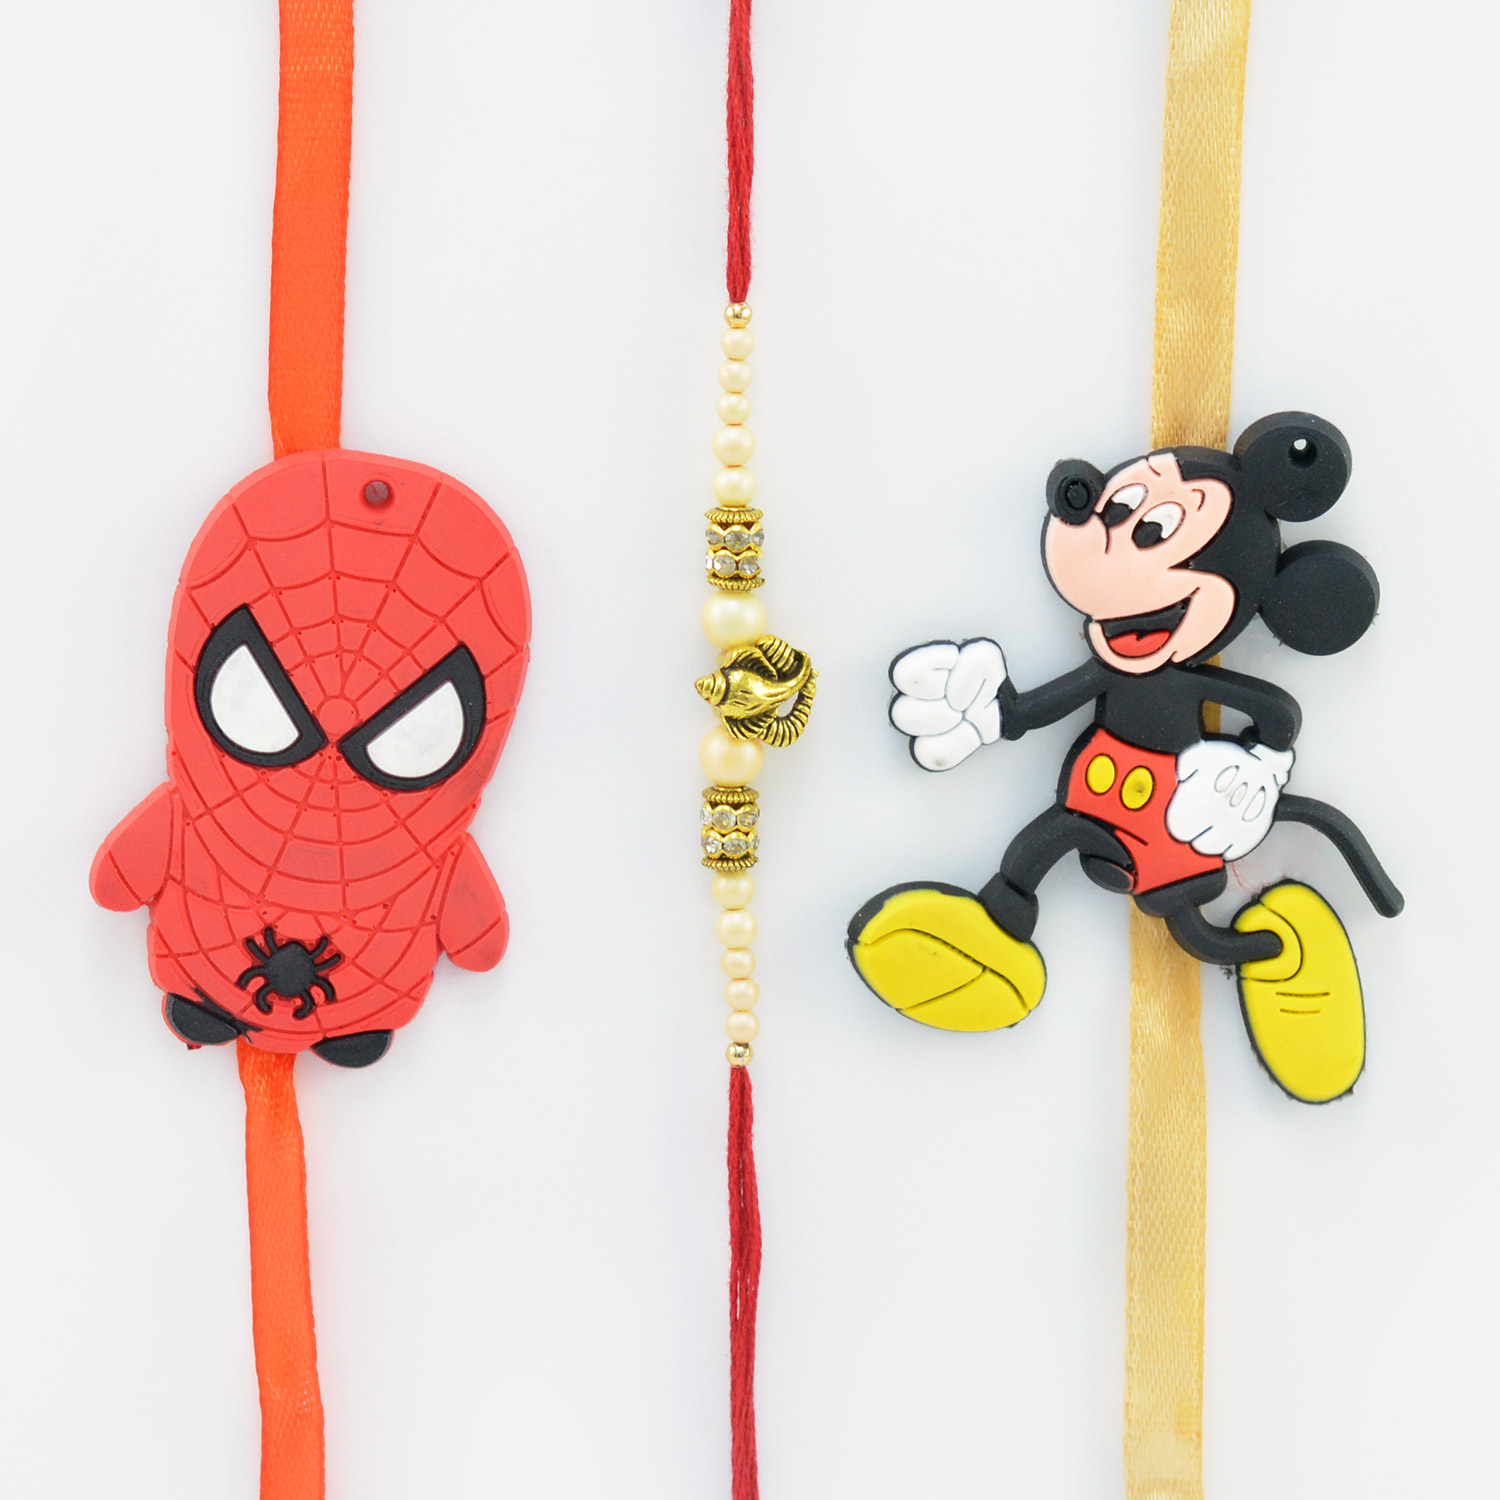 Spider Man and Mickey Mouse Rakhi for Kid with Ganesha Rakhi for Brother.